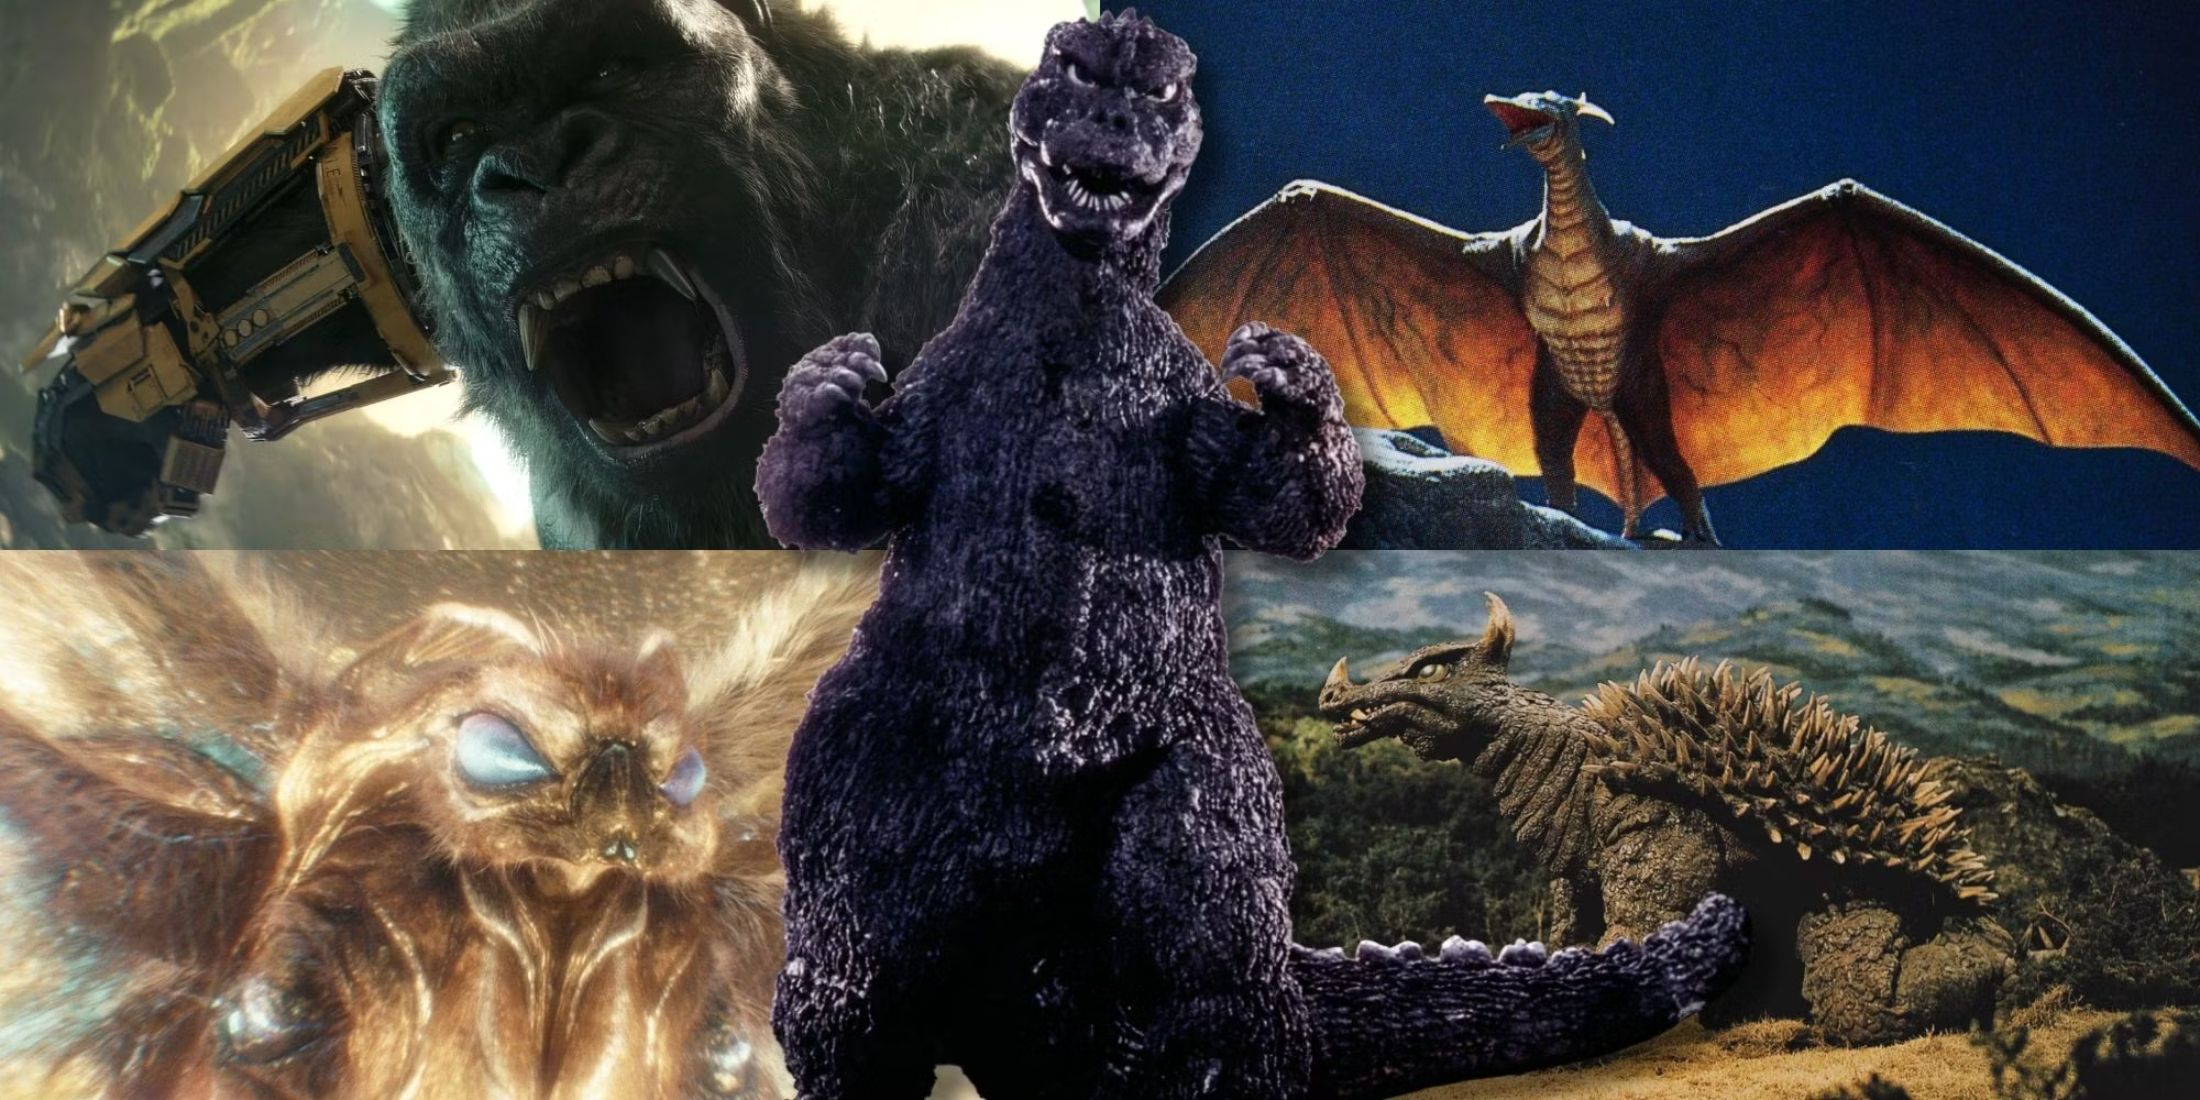 A collage of Godzilla alongside some of his most trustworthy friends & allies - Kong, Rodan, Mothra and Anguirus